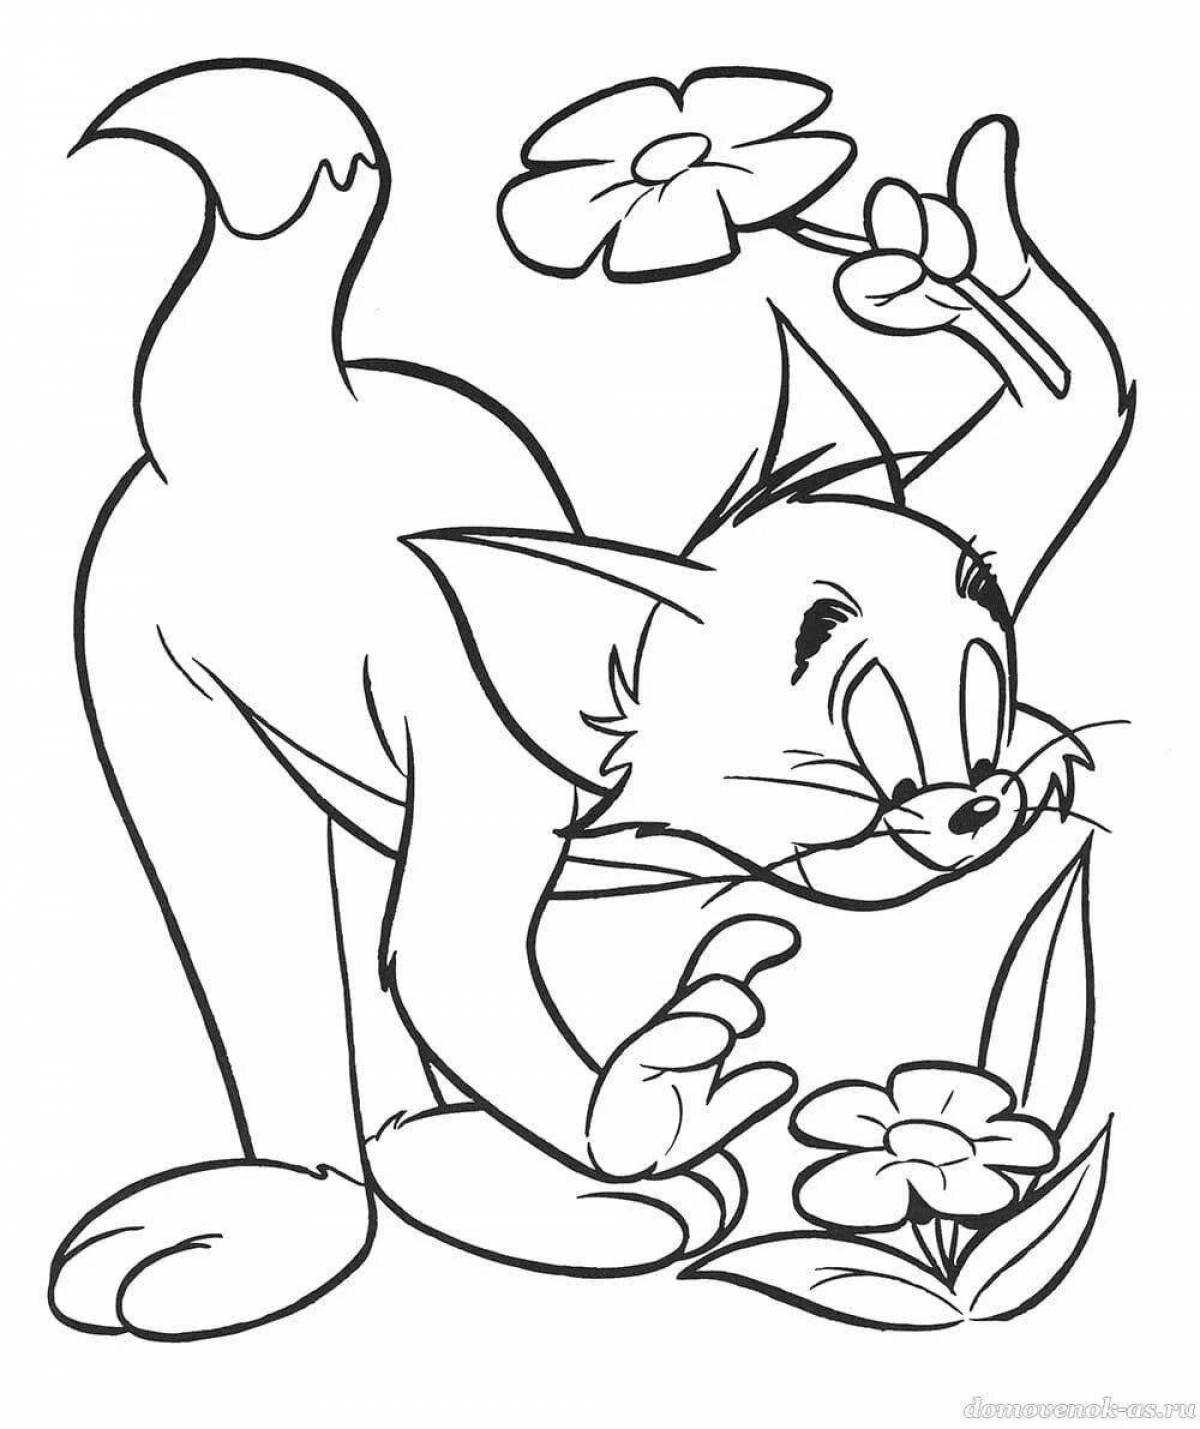 Colored funny coloring pages for children 8 years old